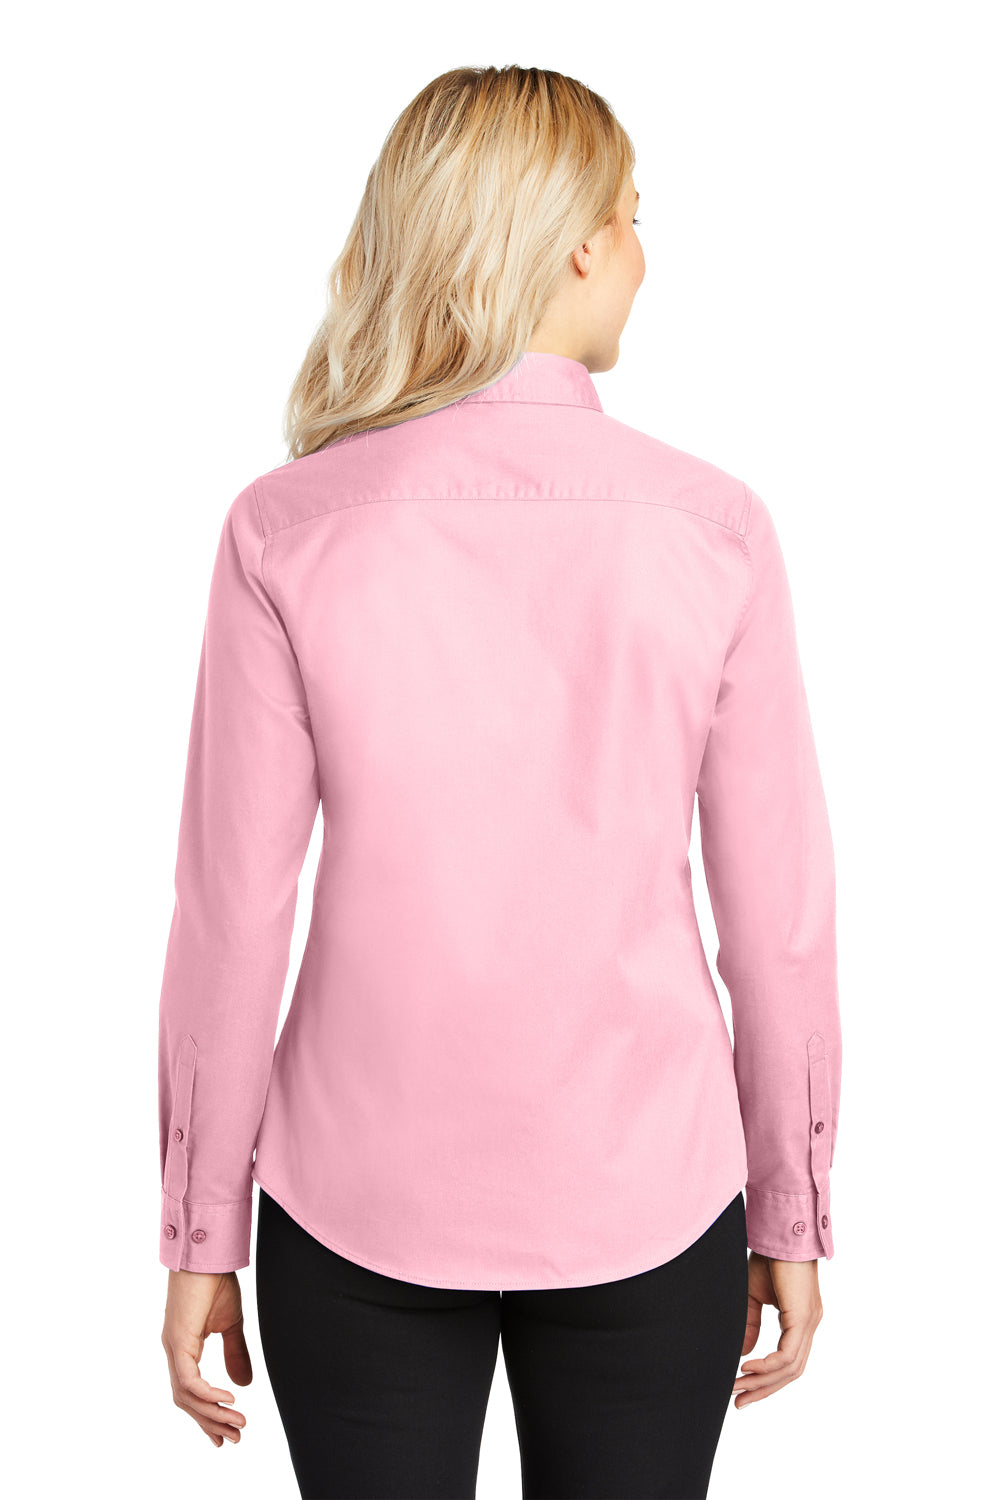 Port Authority L608 Womens Easy Care Wrinkle Resistant Long Sleeve Button Down Shirt Light Pink Back